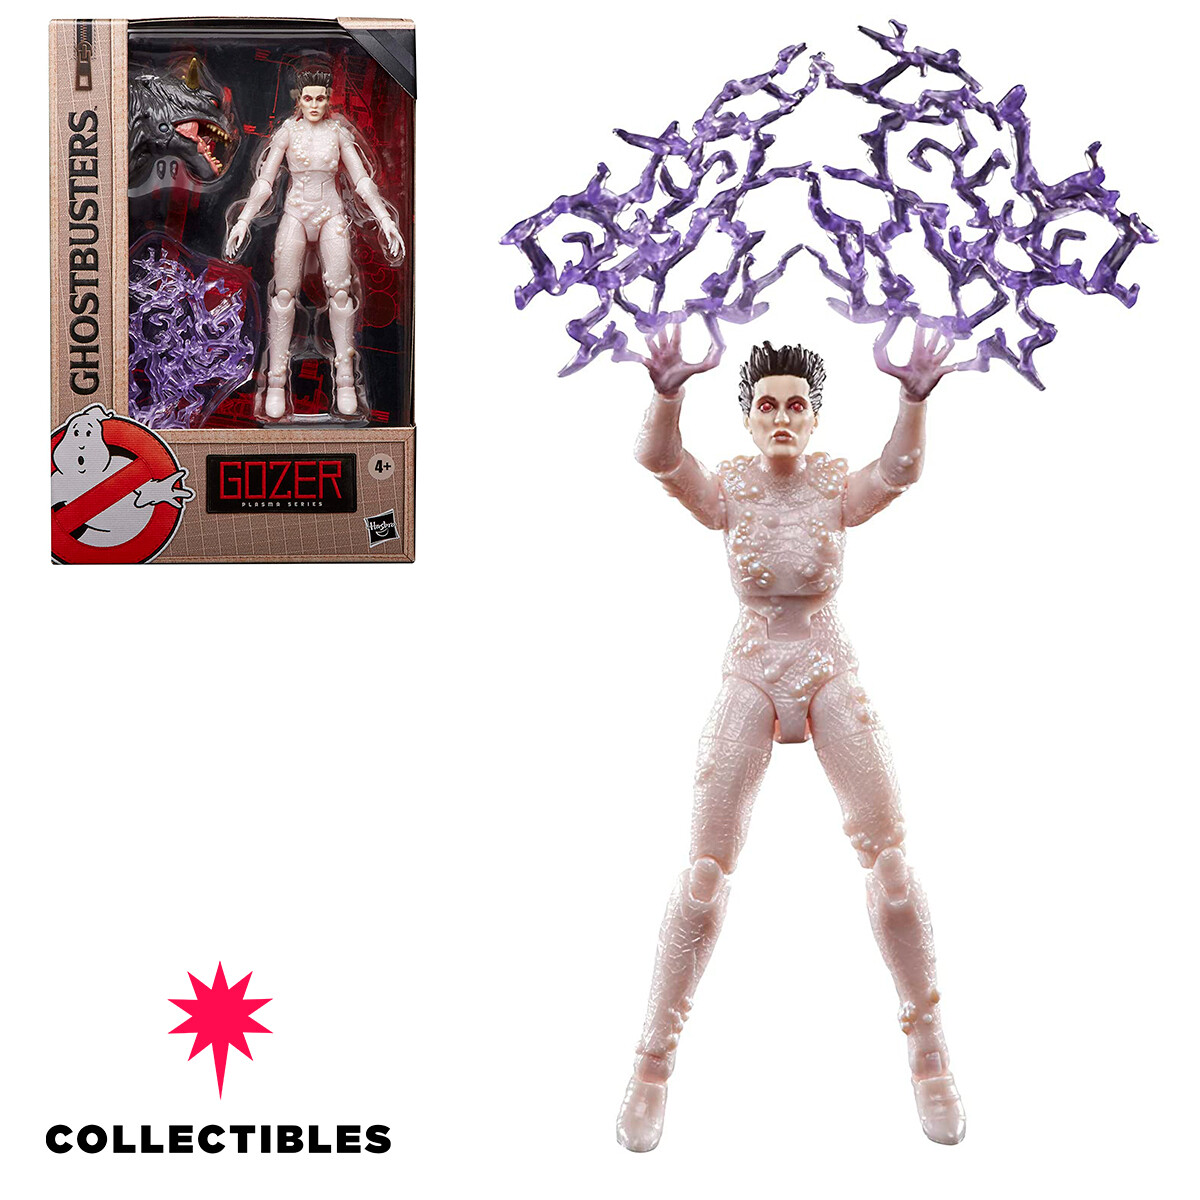 GHOSTBUSTERS! AFTER LIFE PLASMA SERIES GOZER 